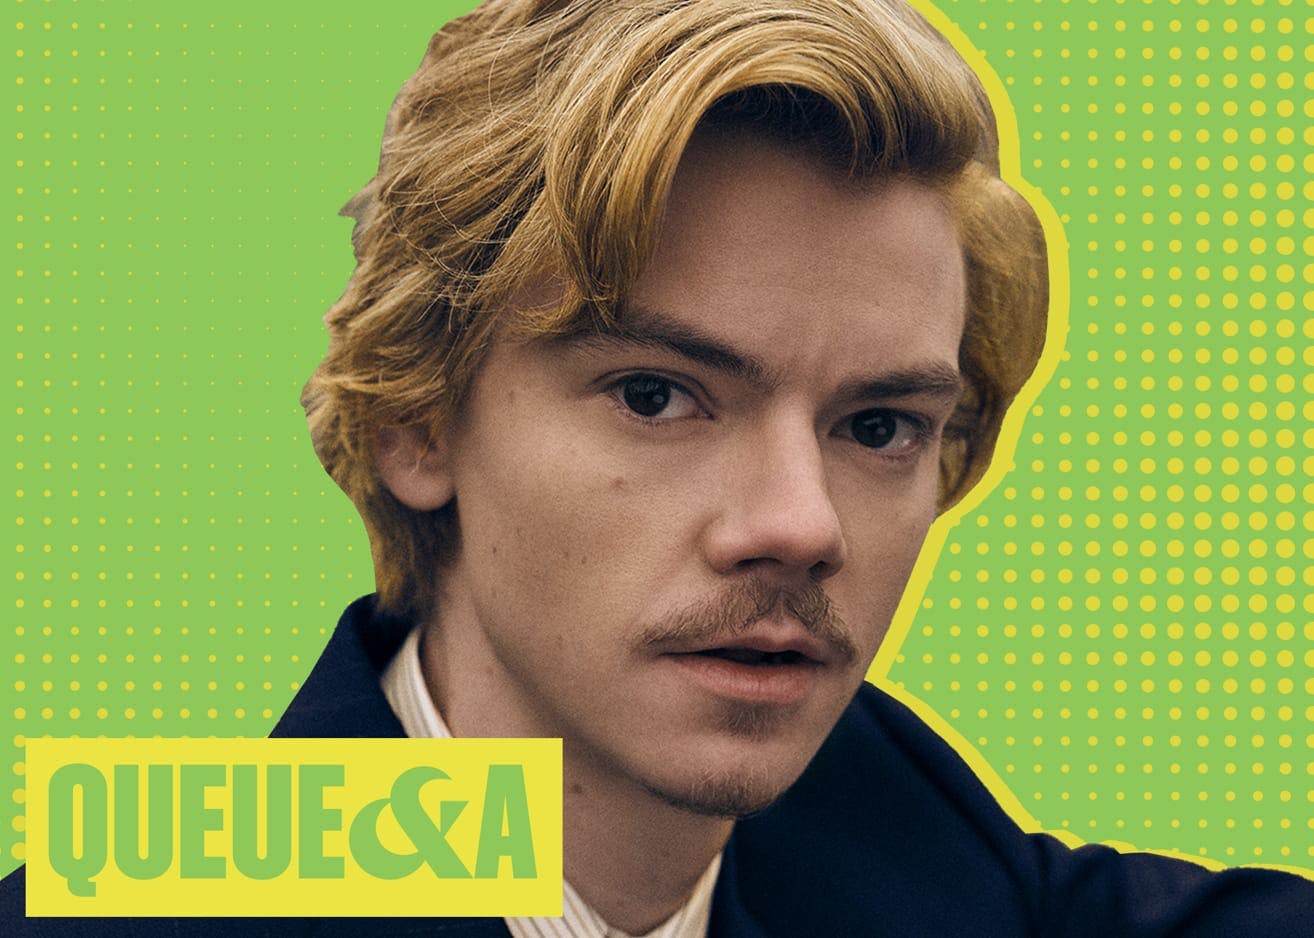 Thomas Brodie-Sangster Answers Queue's Q's